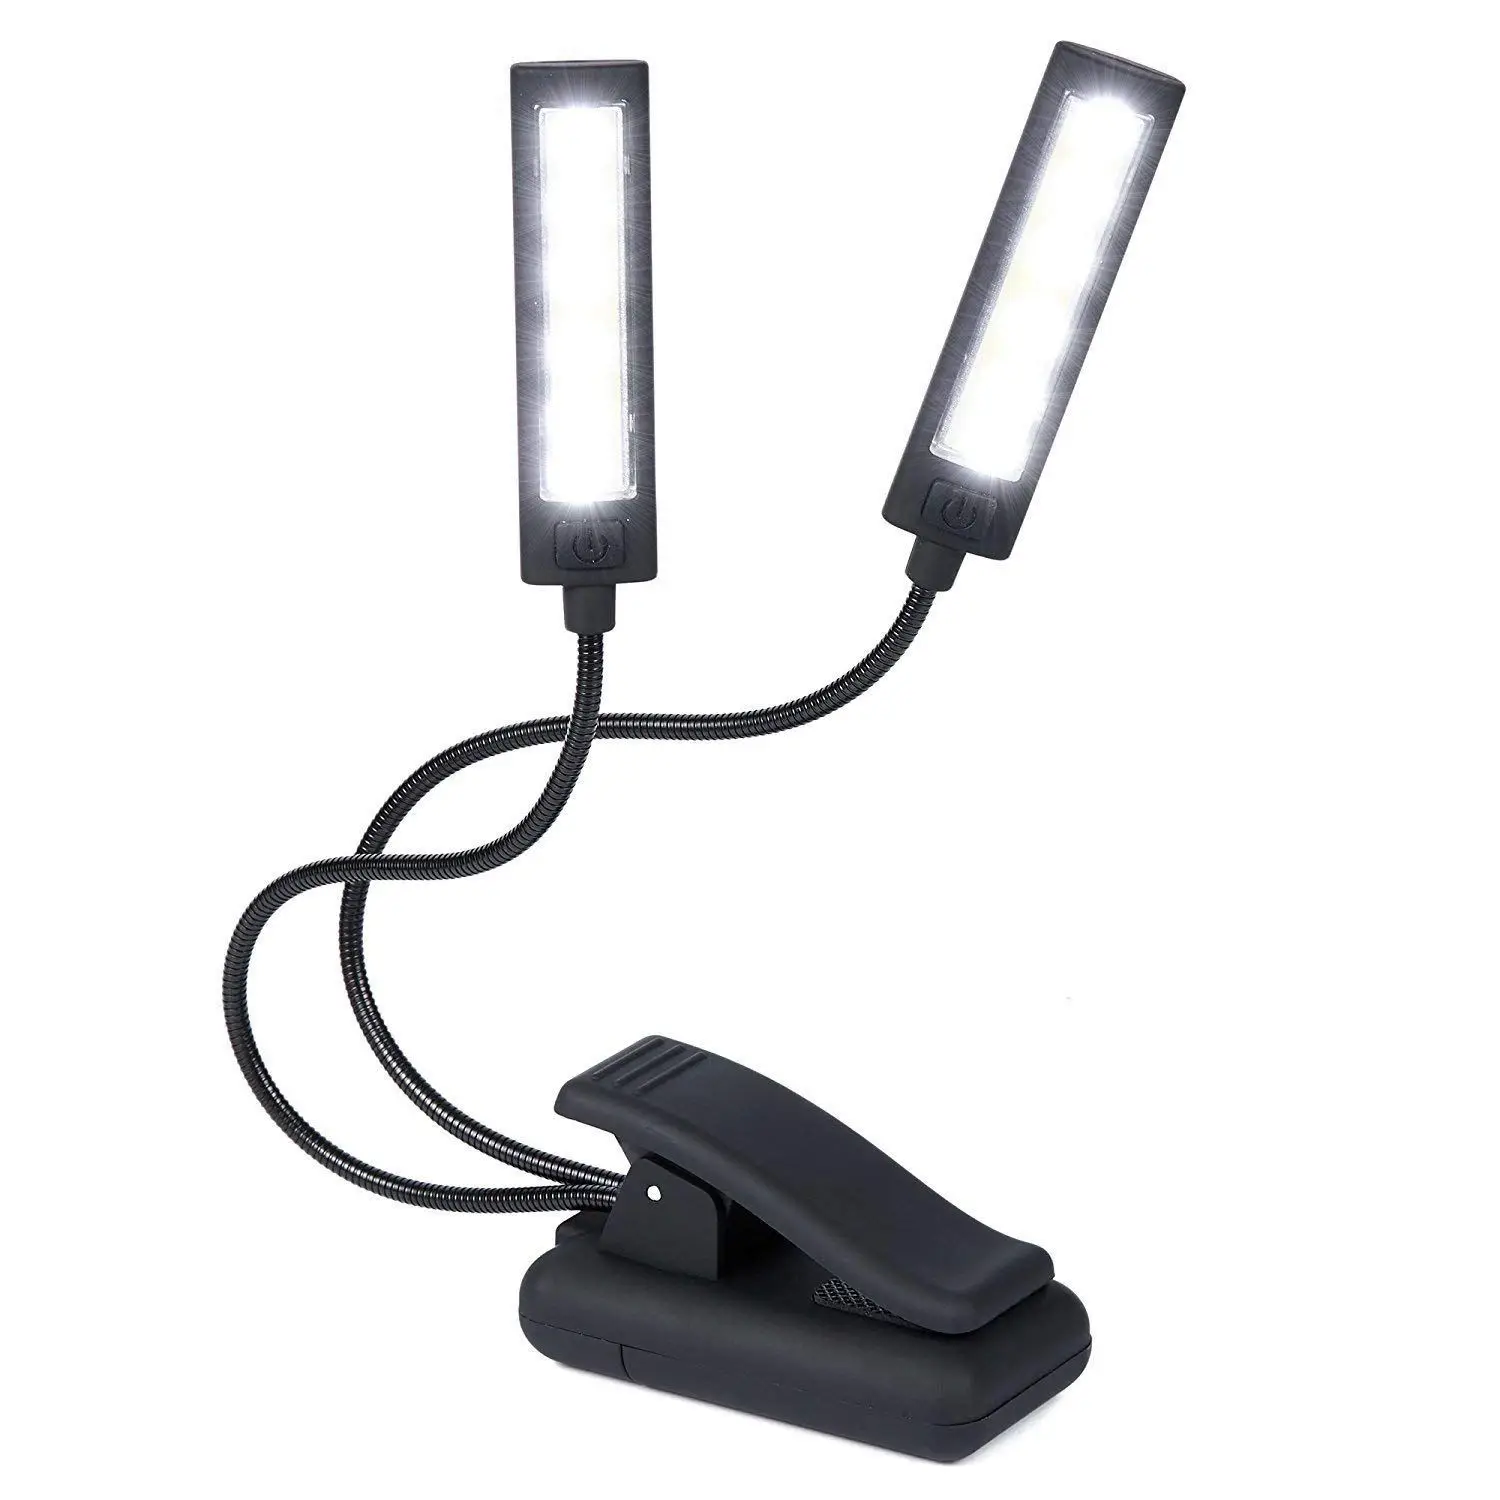 

Music Stand Light Clip On LED Lamp - No Flicker, Fully Adjustable, 6 Levels of Brightness - Also for Book Reading, Orches